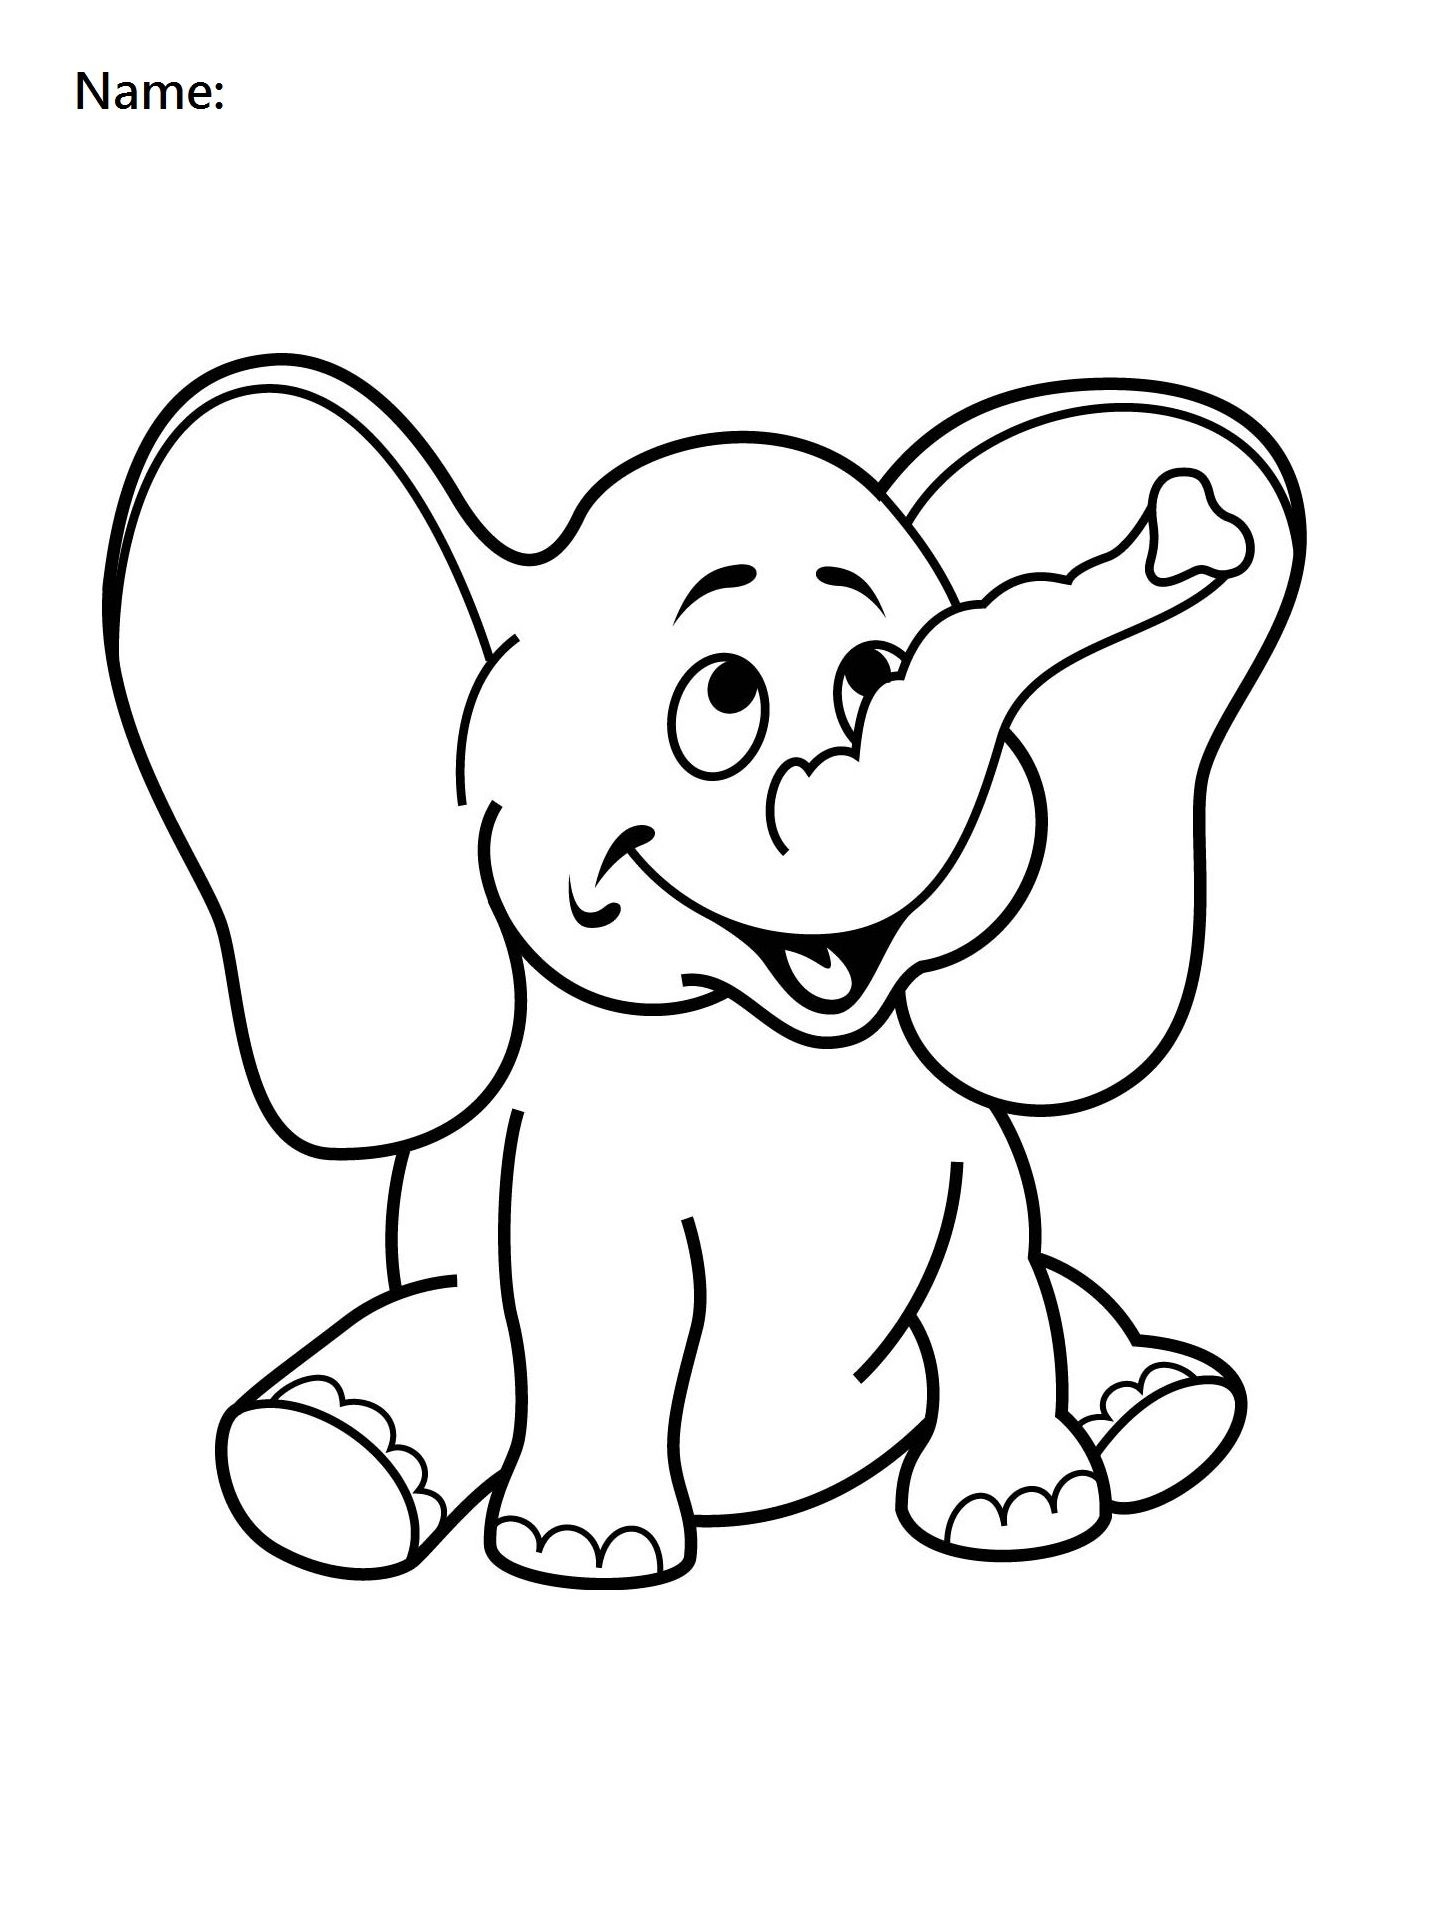 4 Year Old Worksheets Printable Coloring Elephant | Preschool - Free Printable Coloring Pages For 2 Year Olds